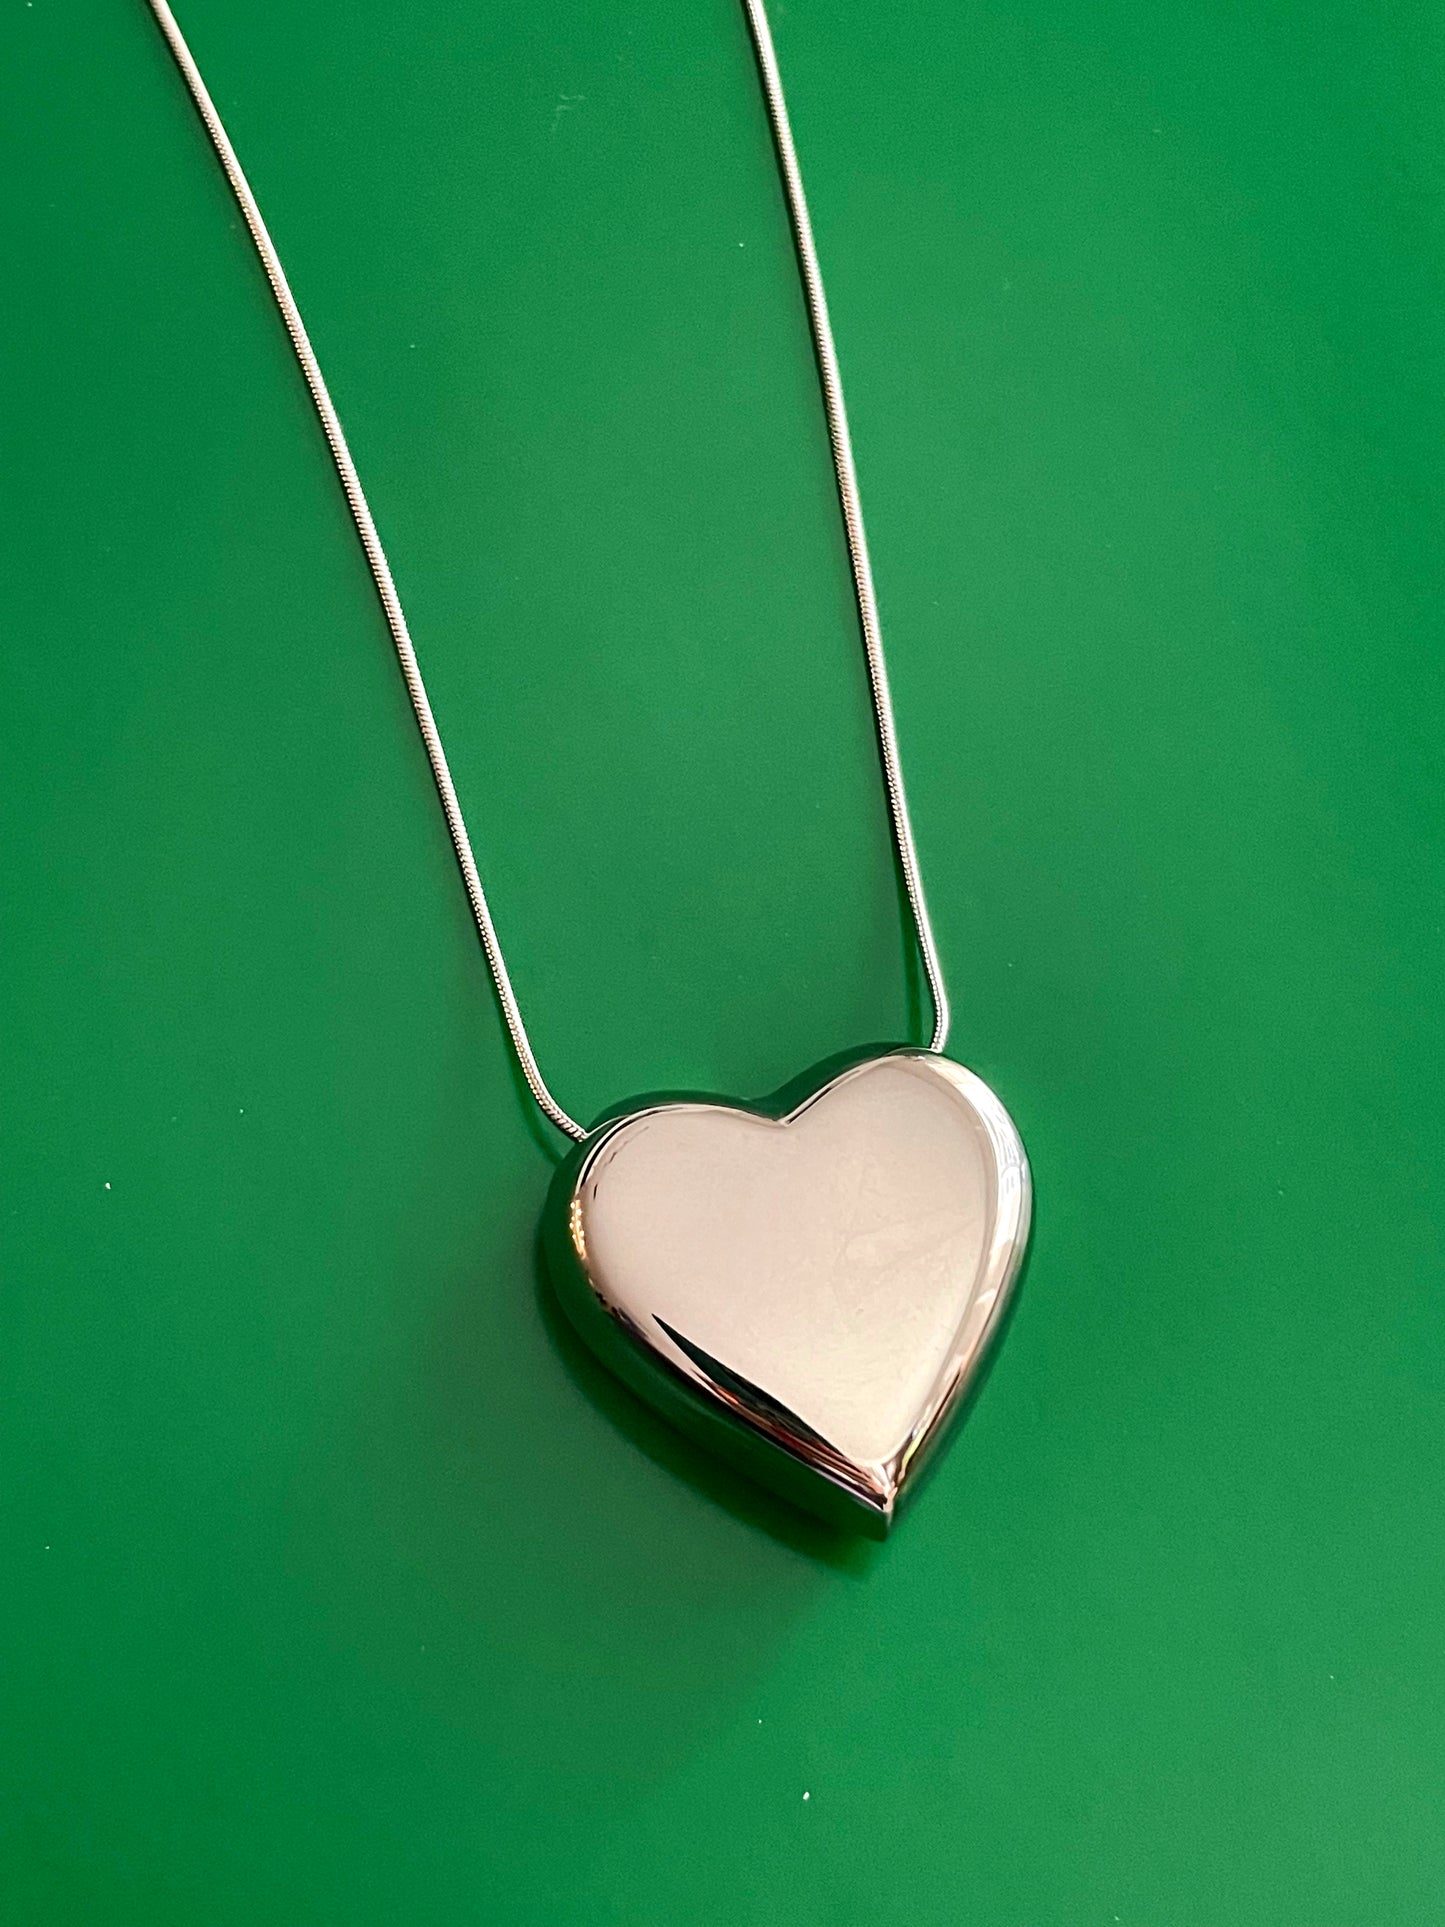 Heart shaped pendant necklace